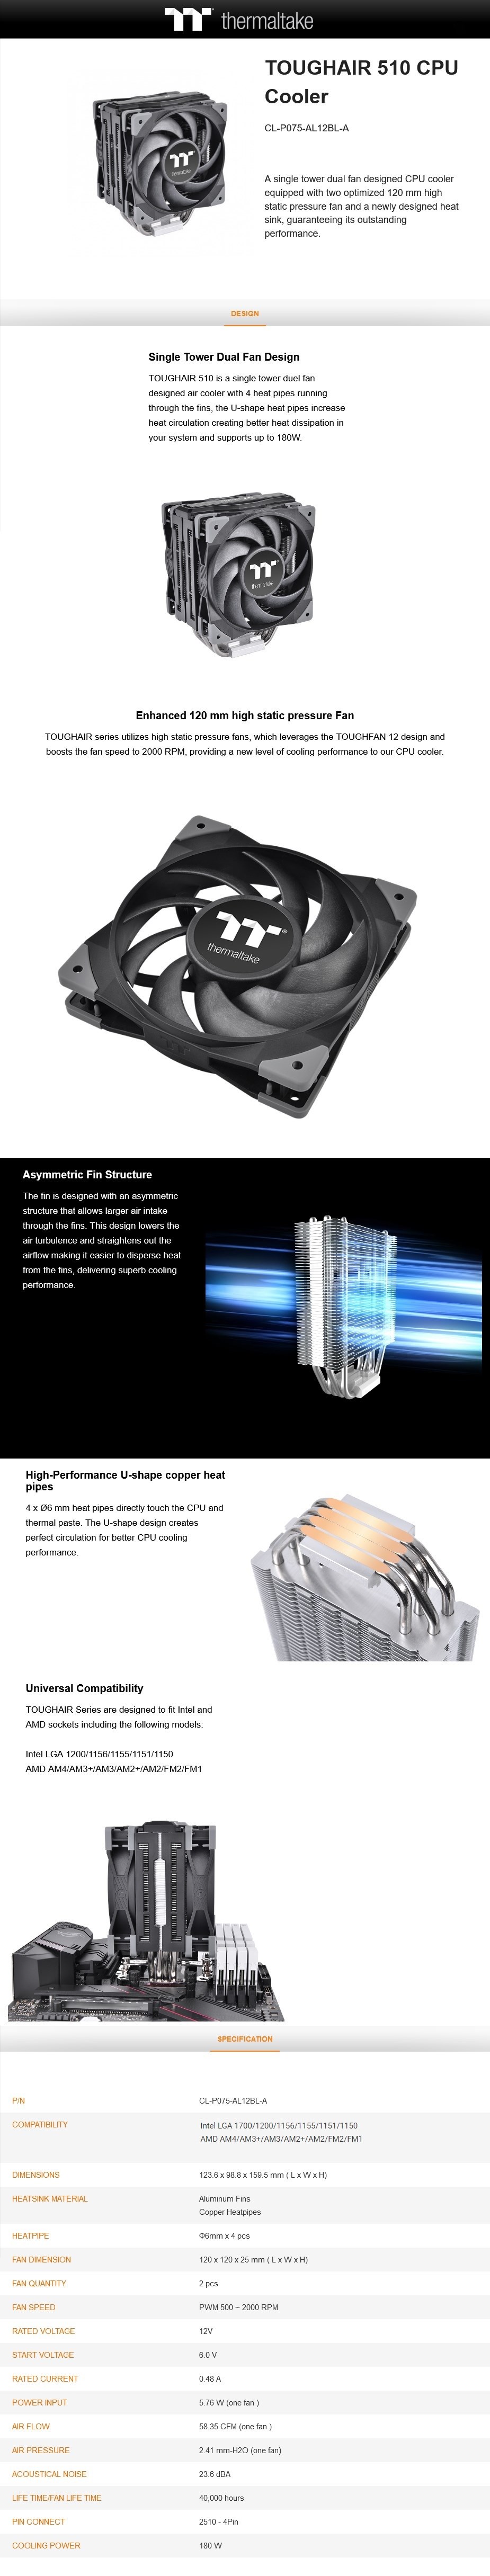 A large marketing image providing additional information about the product Thermaltake Toughair 510 CPU Cooler - Black - Additional alt info not provided